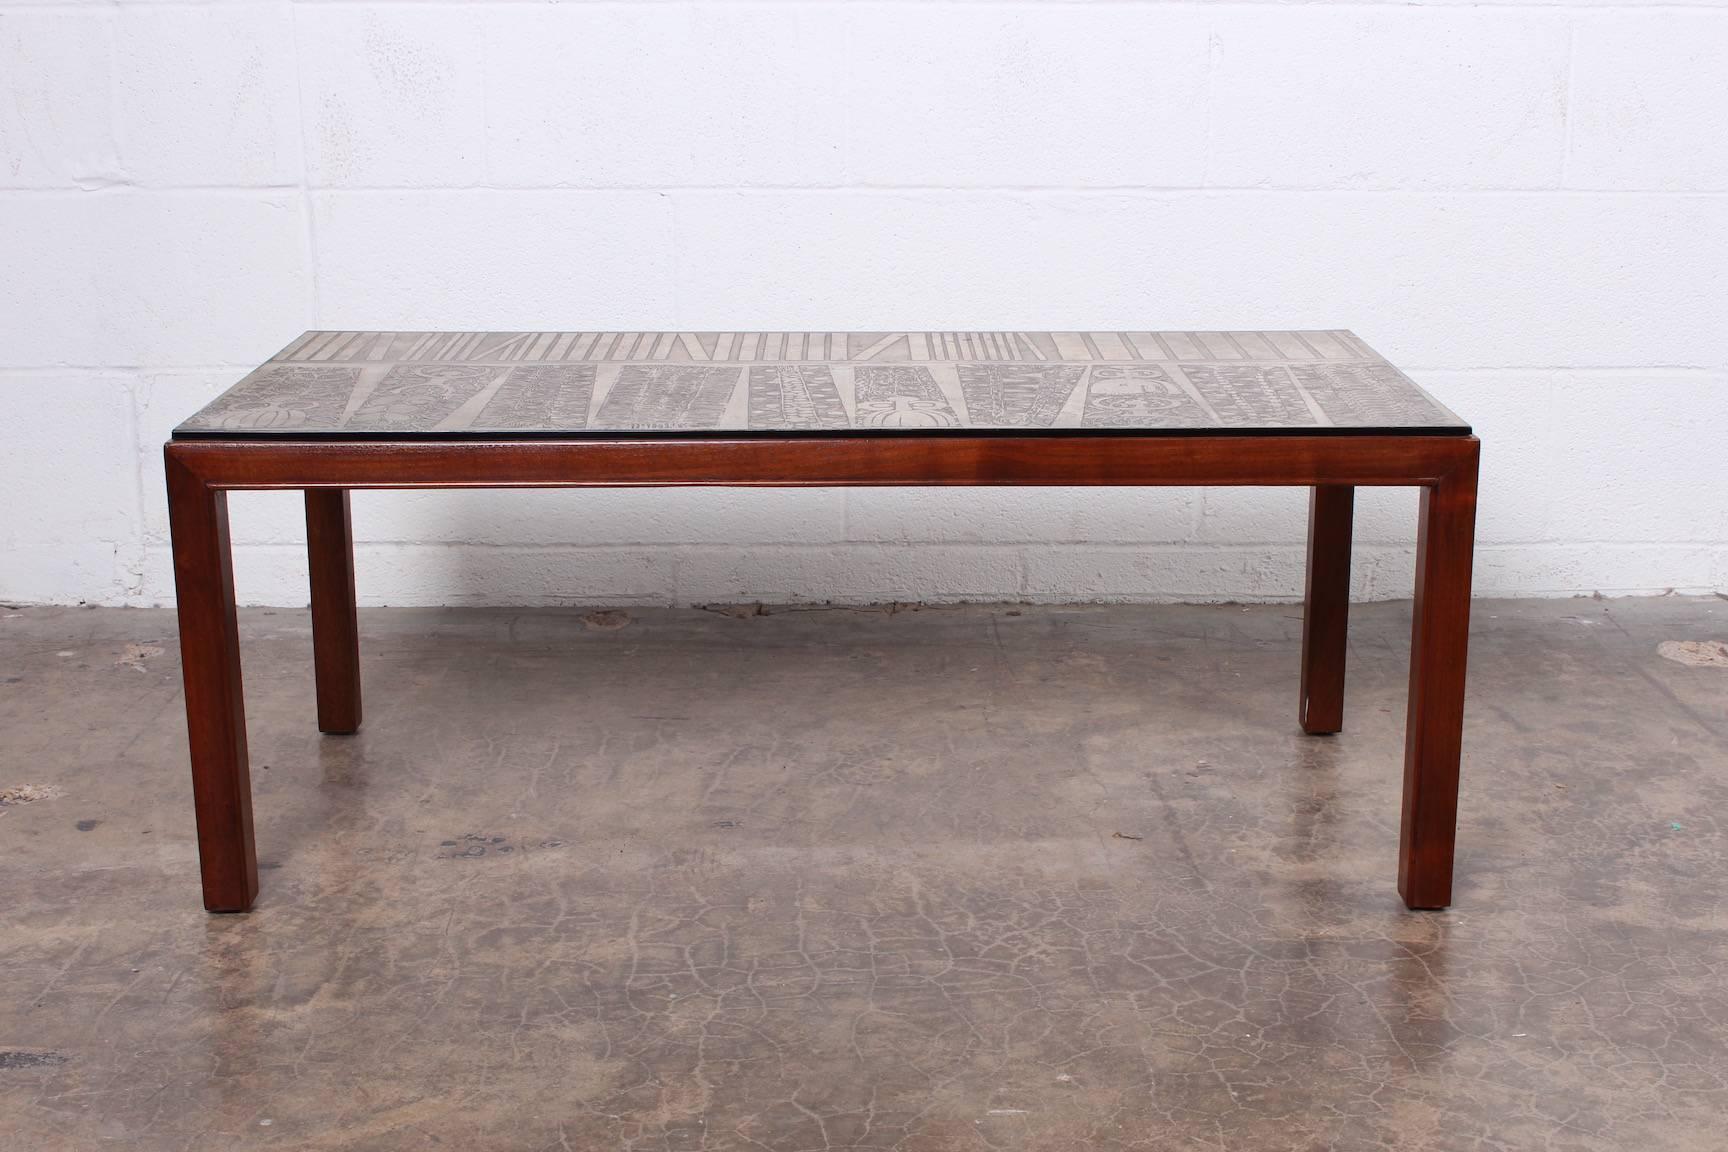 A mahogany coffee table with etched metal top signed by artist and marked 